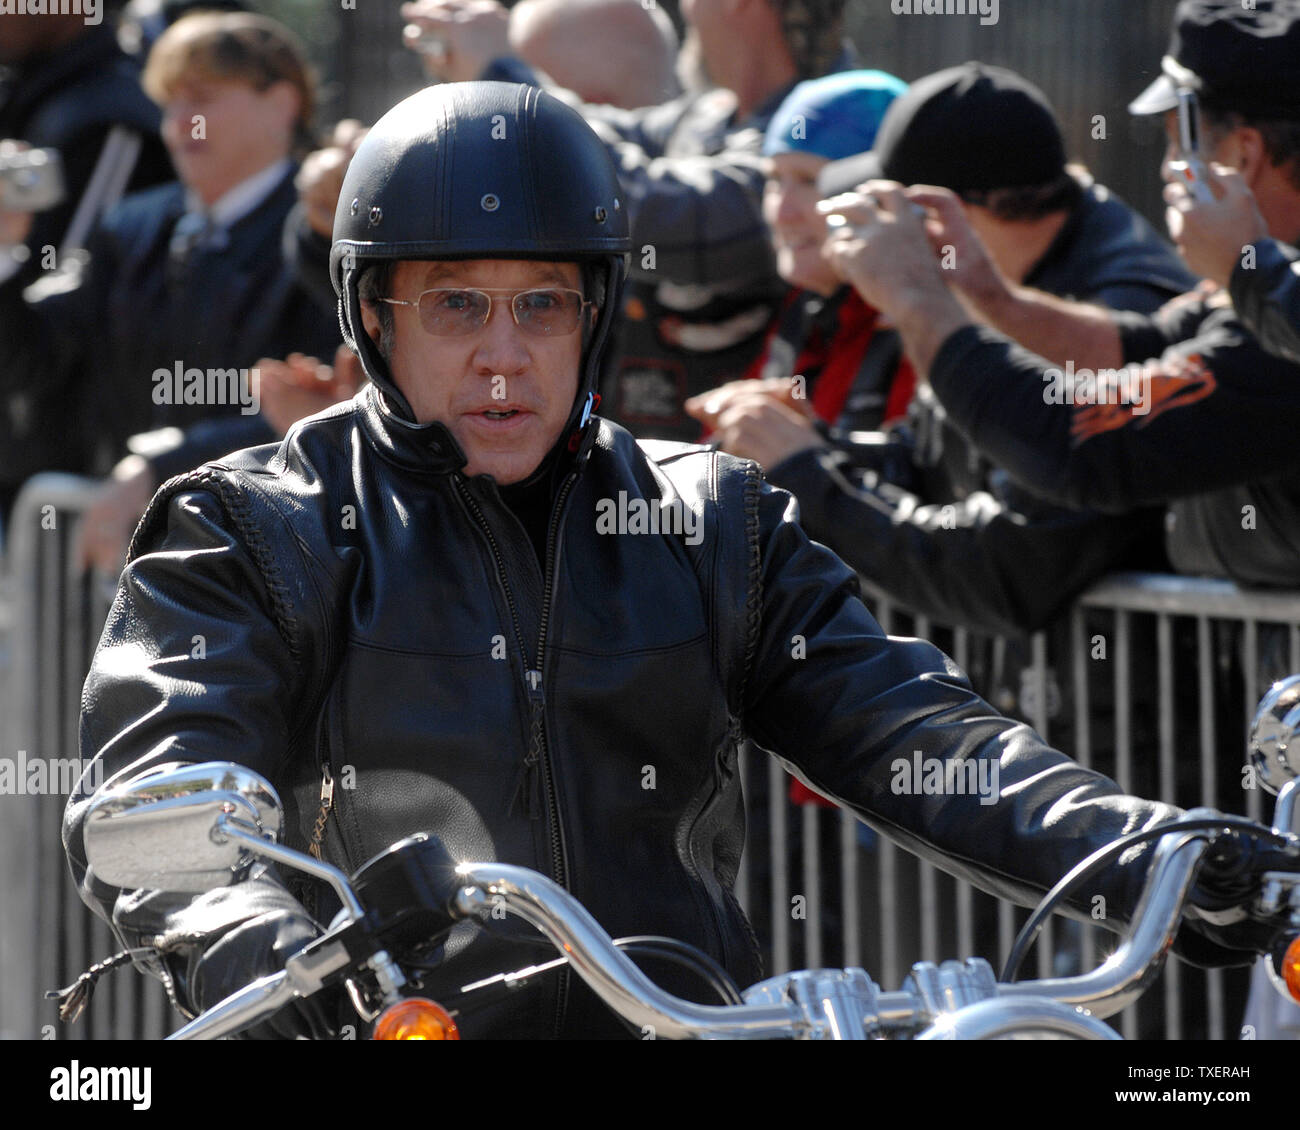 "Wild Hogs" star Tim Allen rides slowly on motorcycle at the Georgia State Capitol on February 6, 2007. He and other actors promoted a motorcycle safety program and their upcoming comedy film. (UPI Photo/John Dickerson) Stock Photo